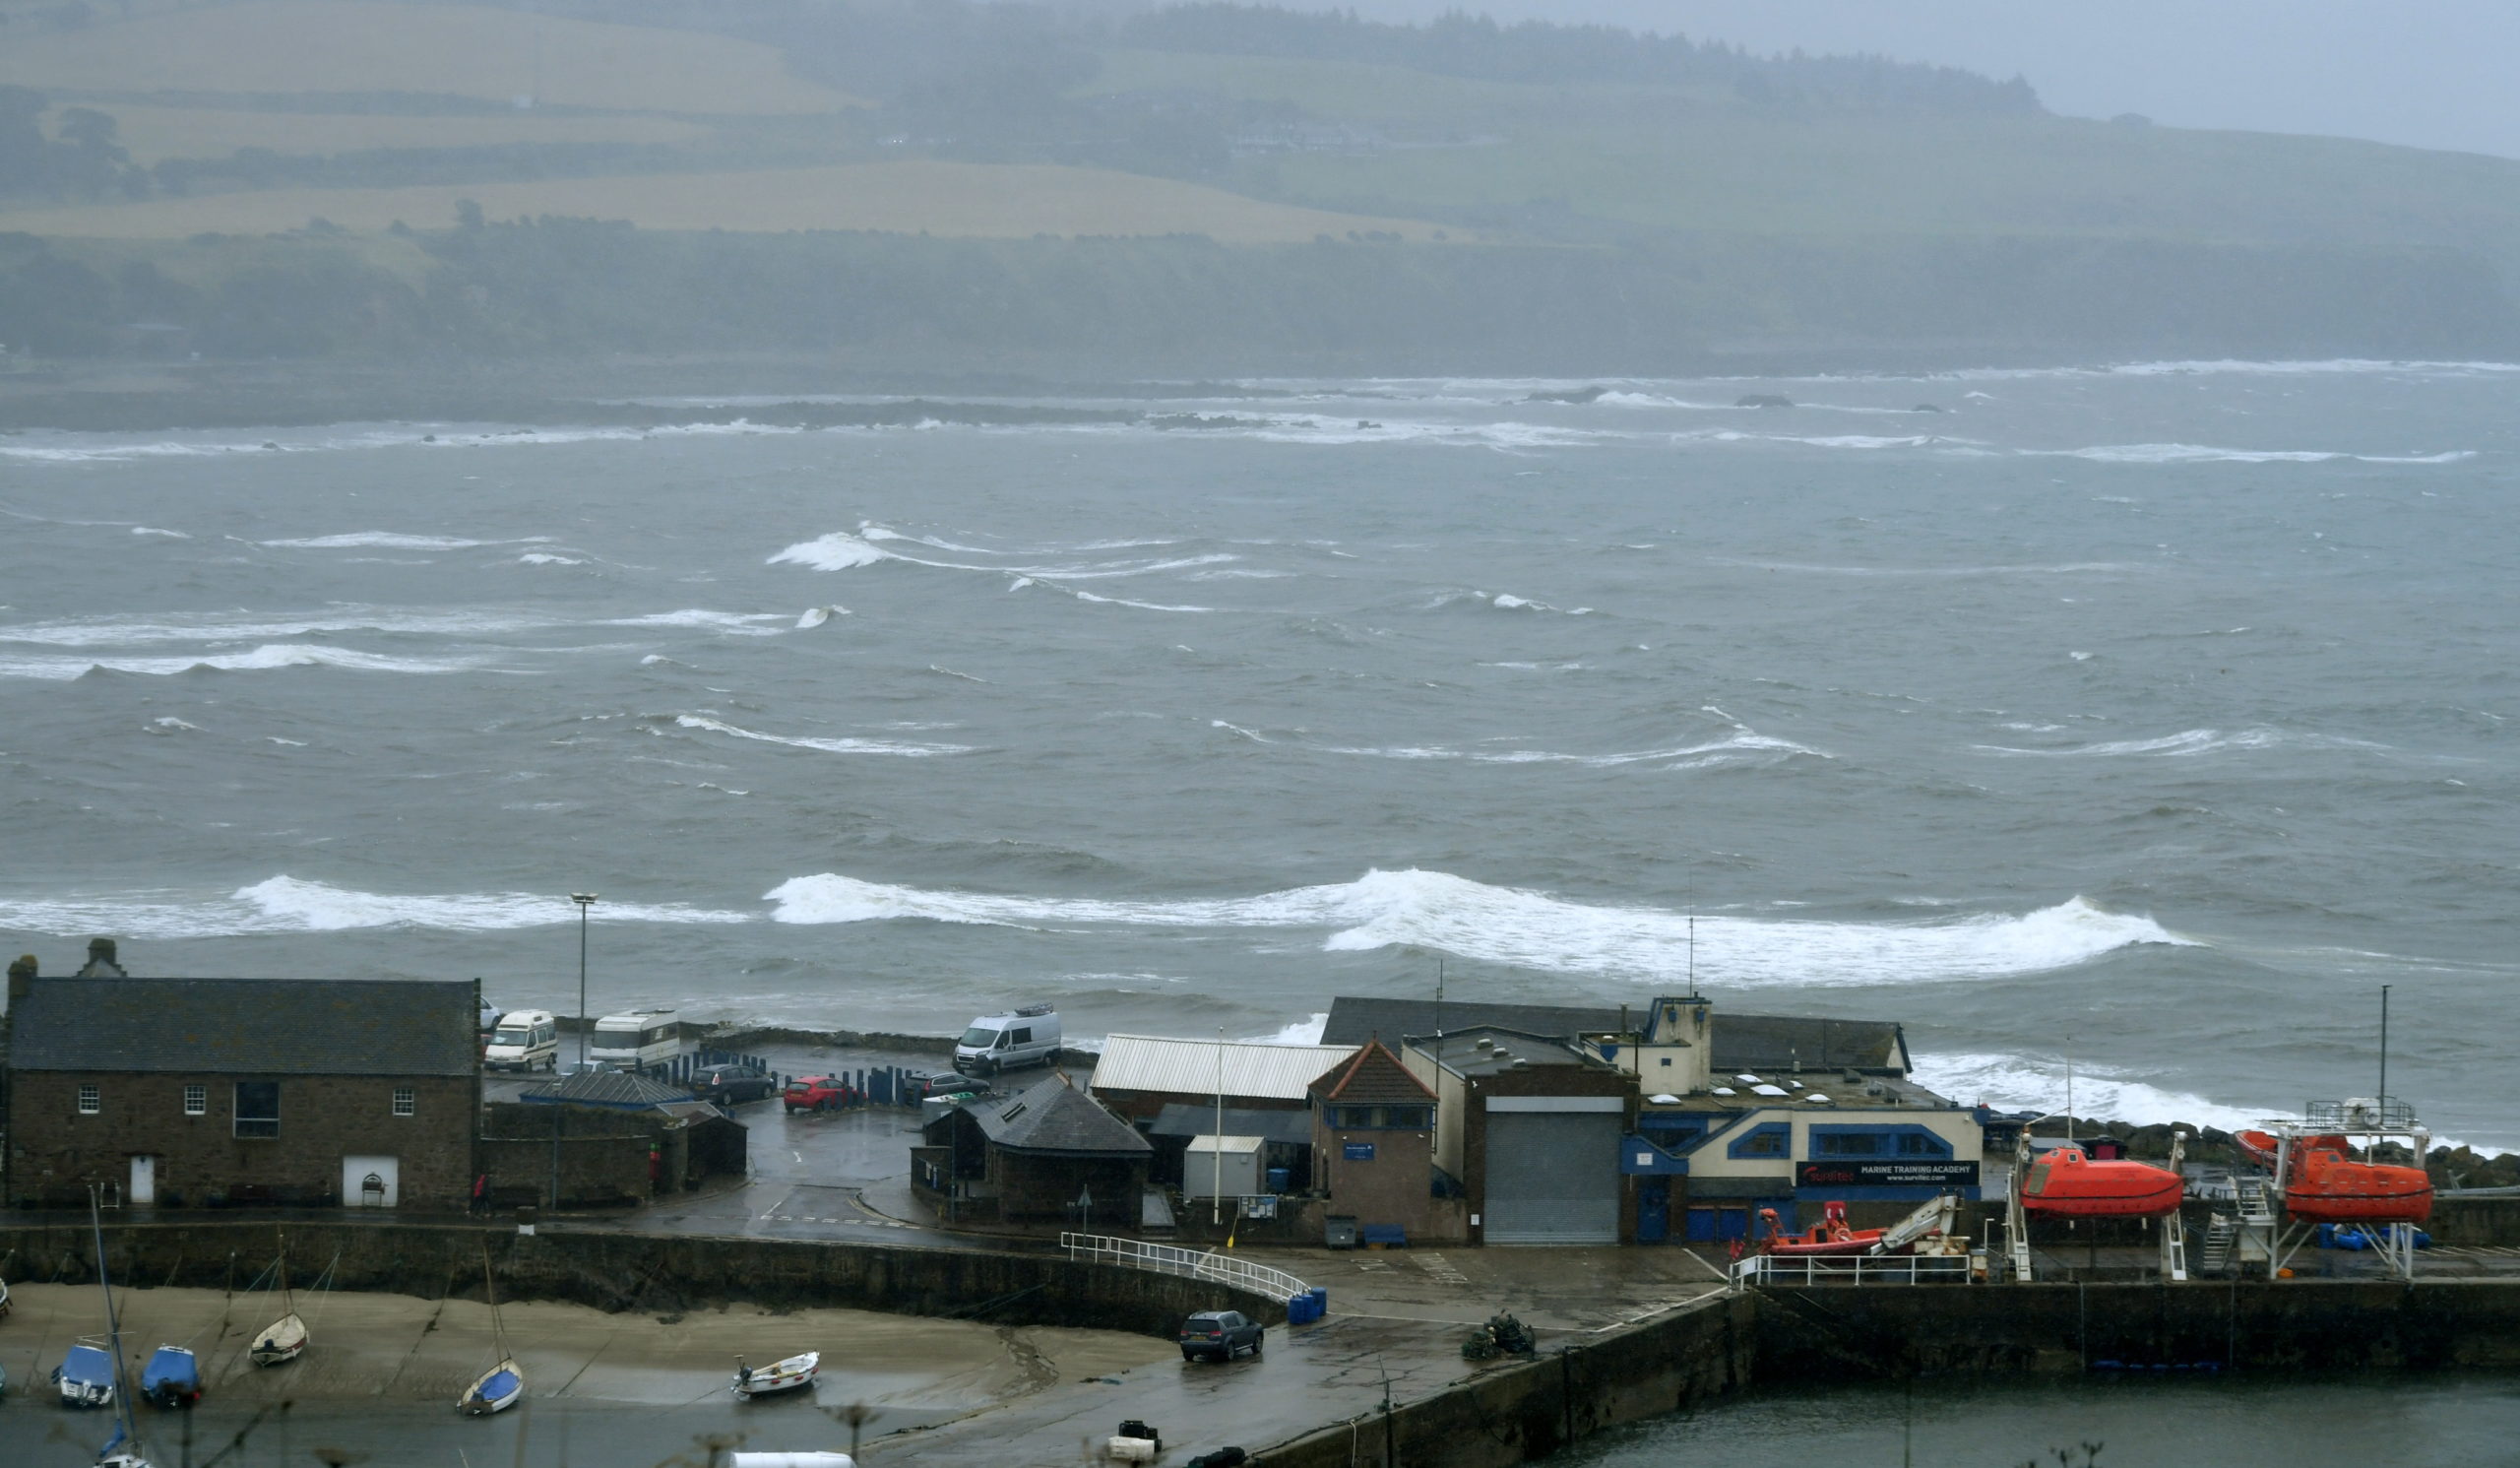 A stormy tide could be seen coming in at Stonehaven.
Picture by Chris Sumner
Taken...............25/08/20